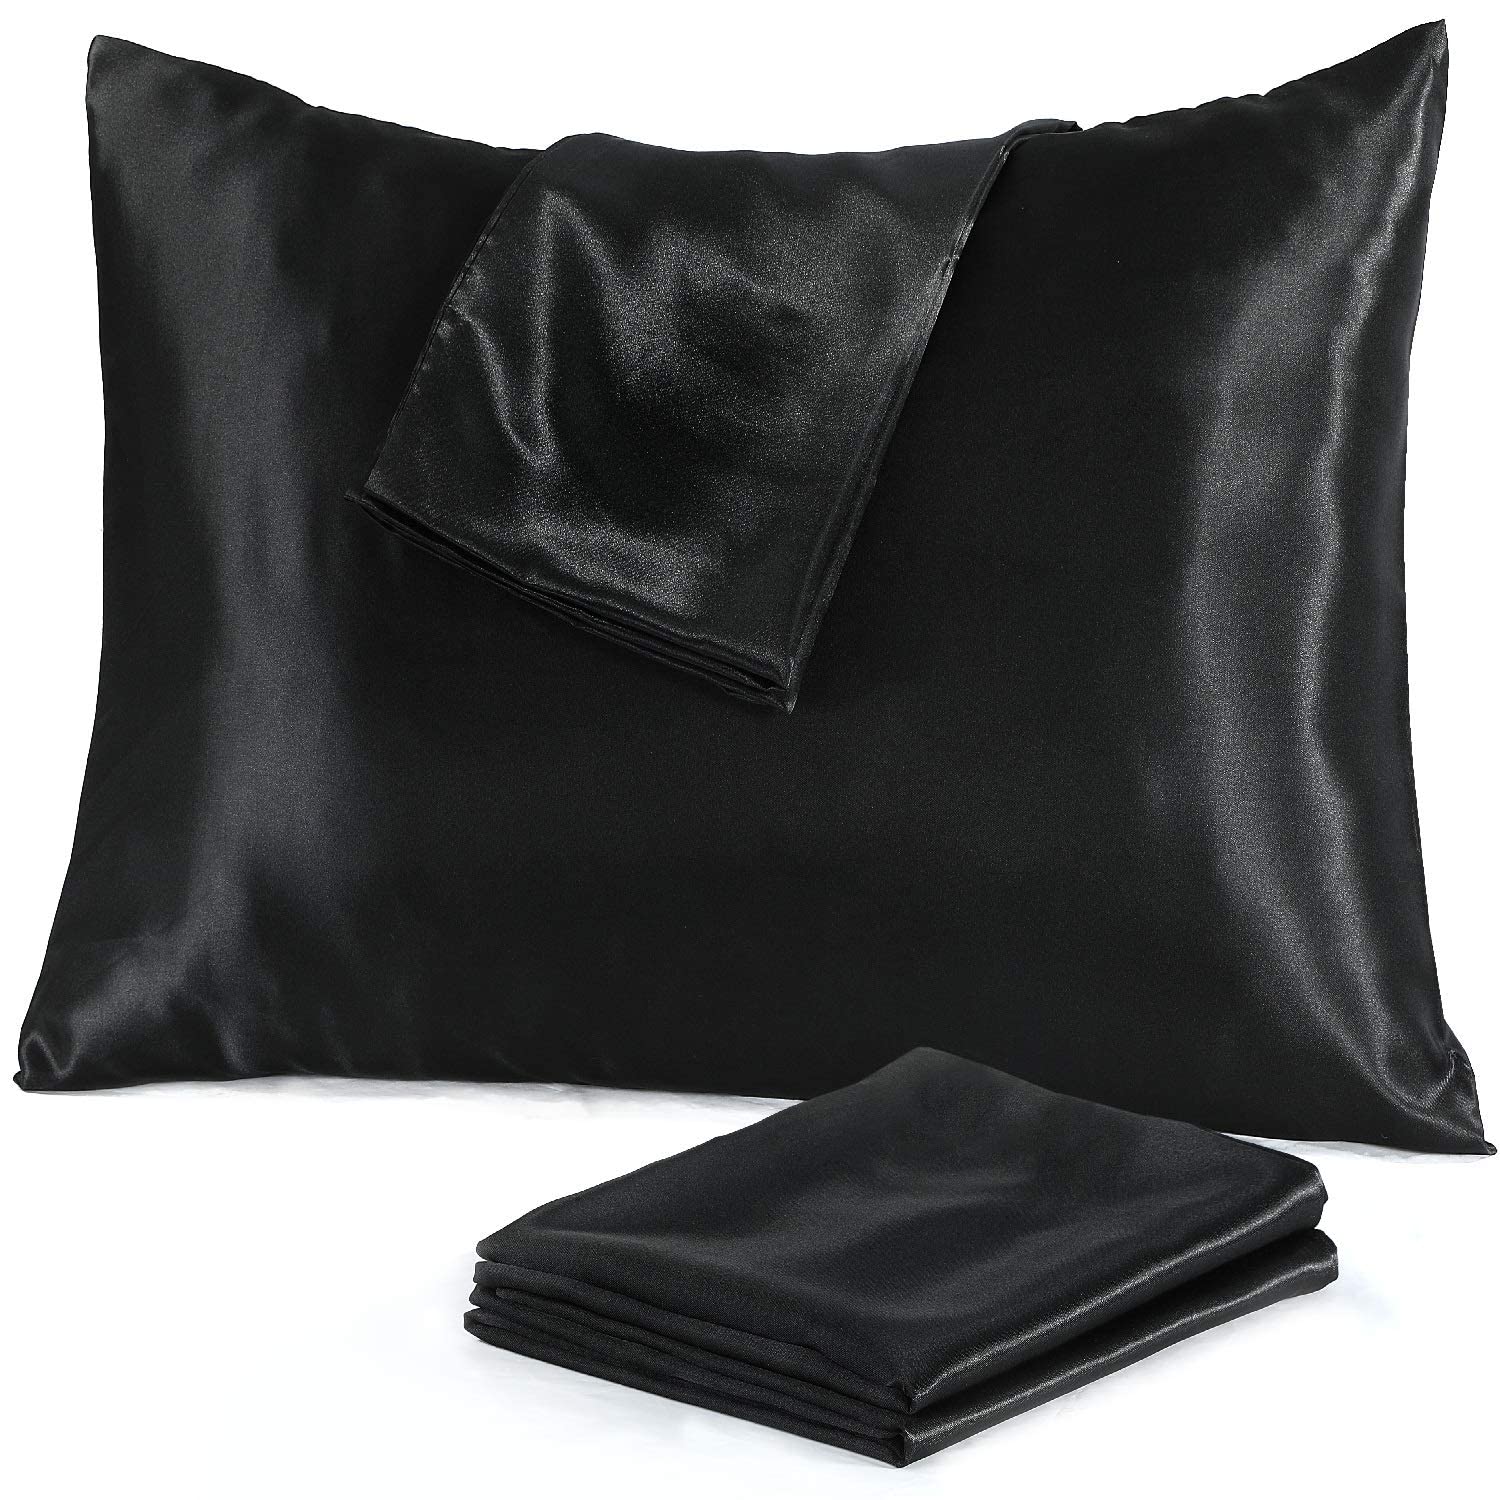 Book Cover Niagara Sleep Solution 4Pack Zipper Black Satin Pillow Cases for Hair and Skin Anti Wrinkle Luxury Standard 20x26inches 100% Silky Satin Pillow Covers Ultra-Soft (4 Pack Black Satin)